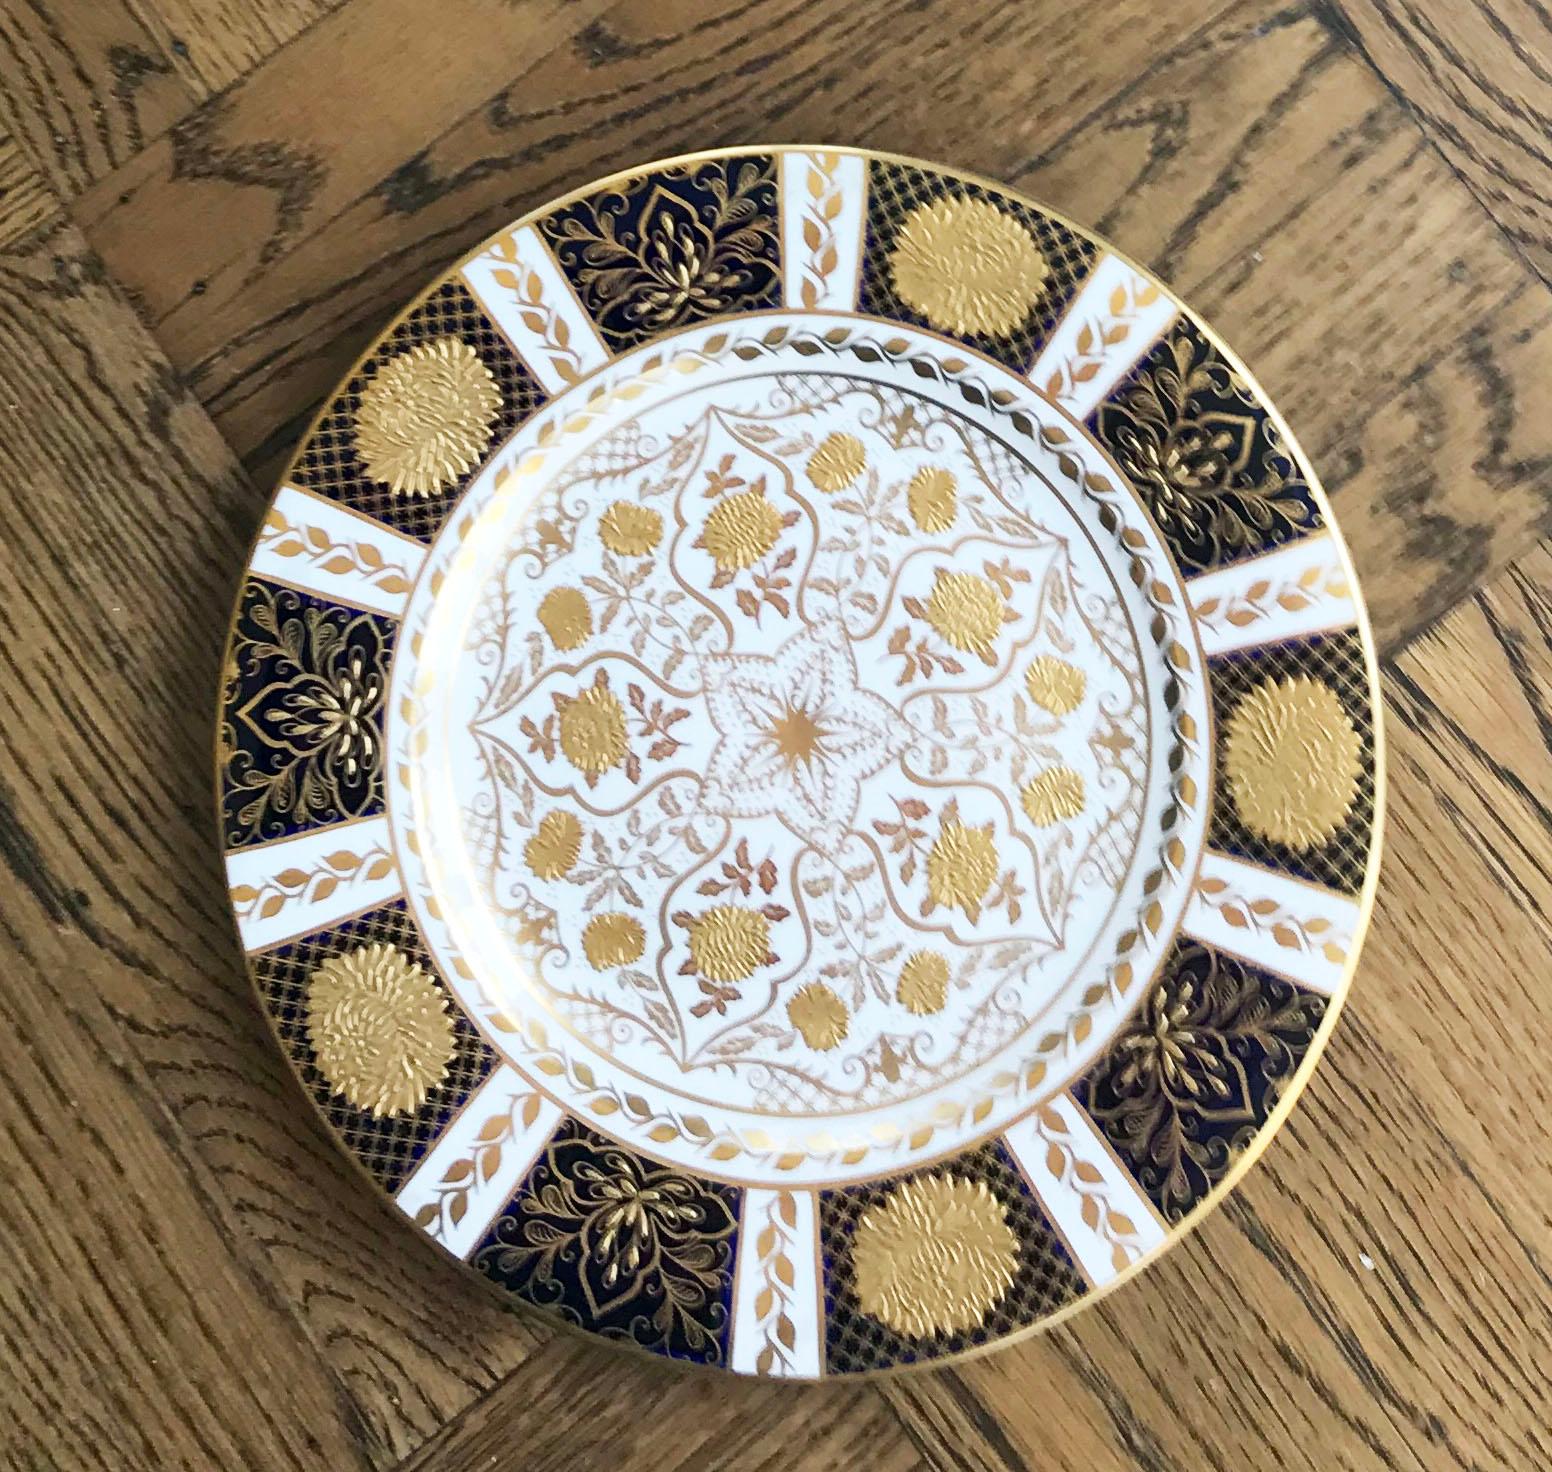 A rare set of twelve gorgeous Abbeydale Duffield/Derbyshire dinner plates in the imperial gold pattern. The plates are bone china and sold for T. Goode & Co., London, made in England. They feature an ornate design of gold chrysanthemum flowers,